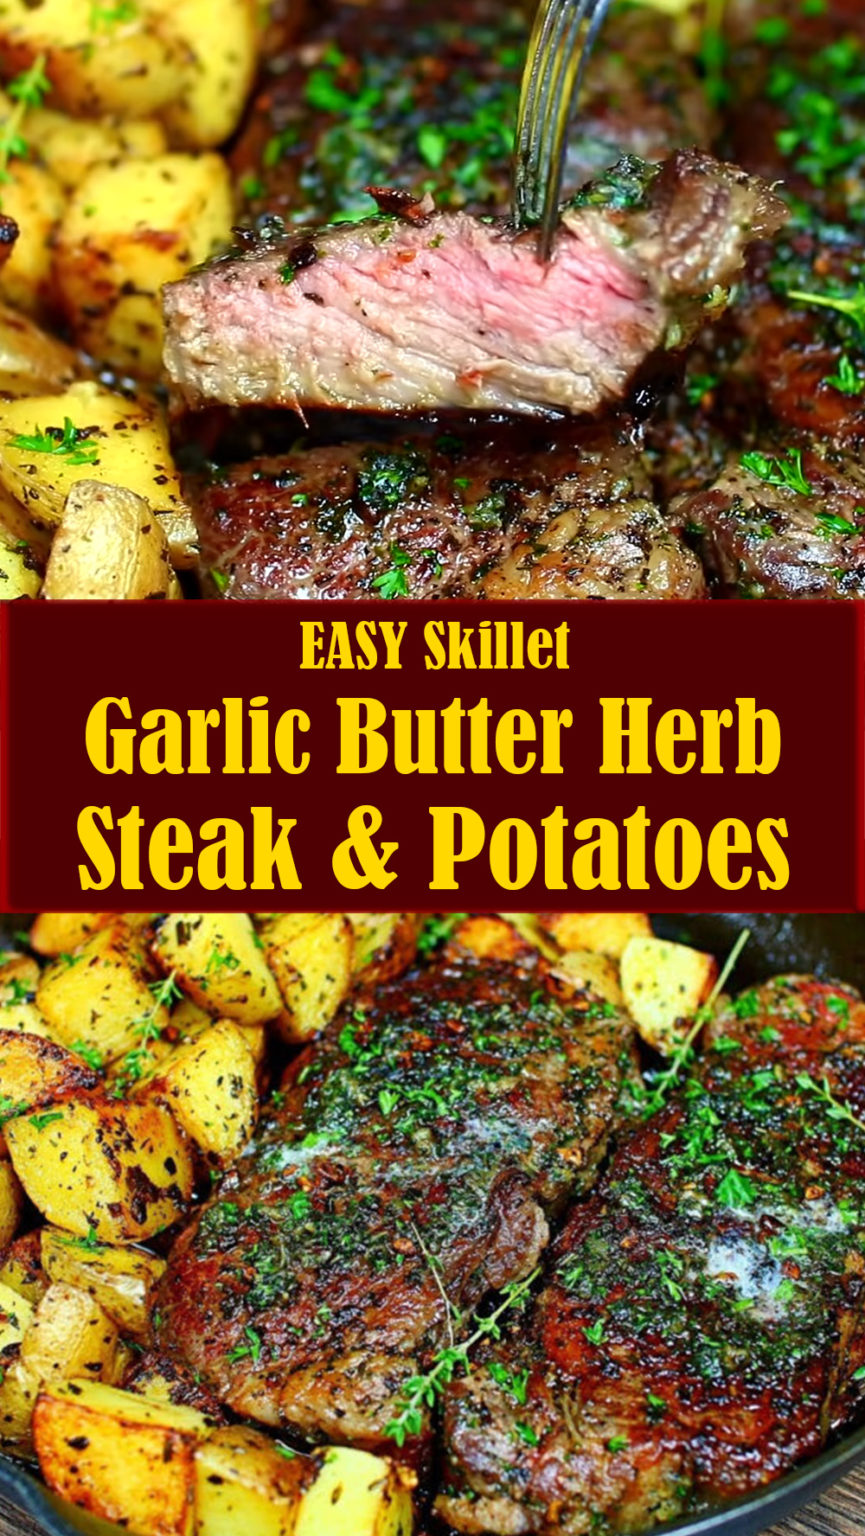 Easy Skillet Garlic Butter Herb Steak And Potatoes With Video Reserveamana 